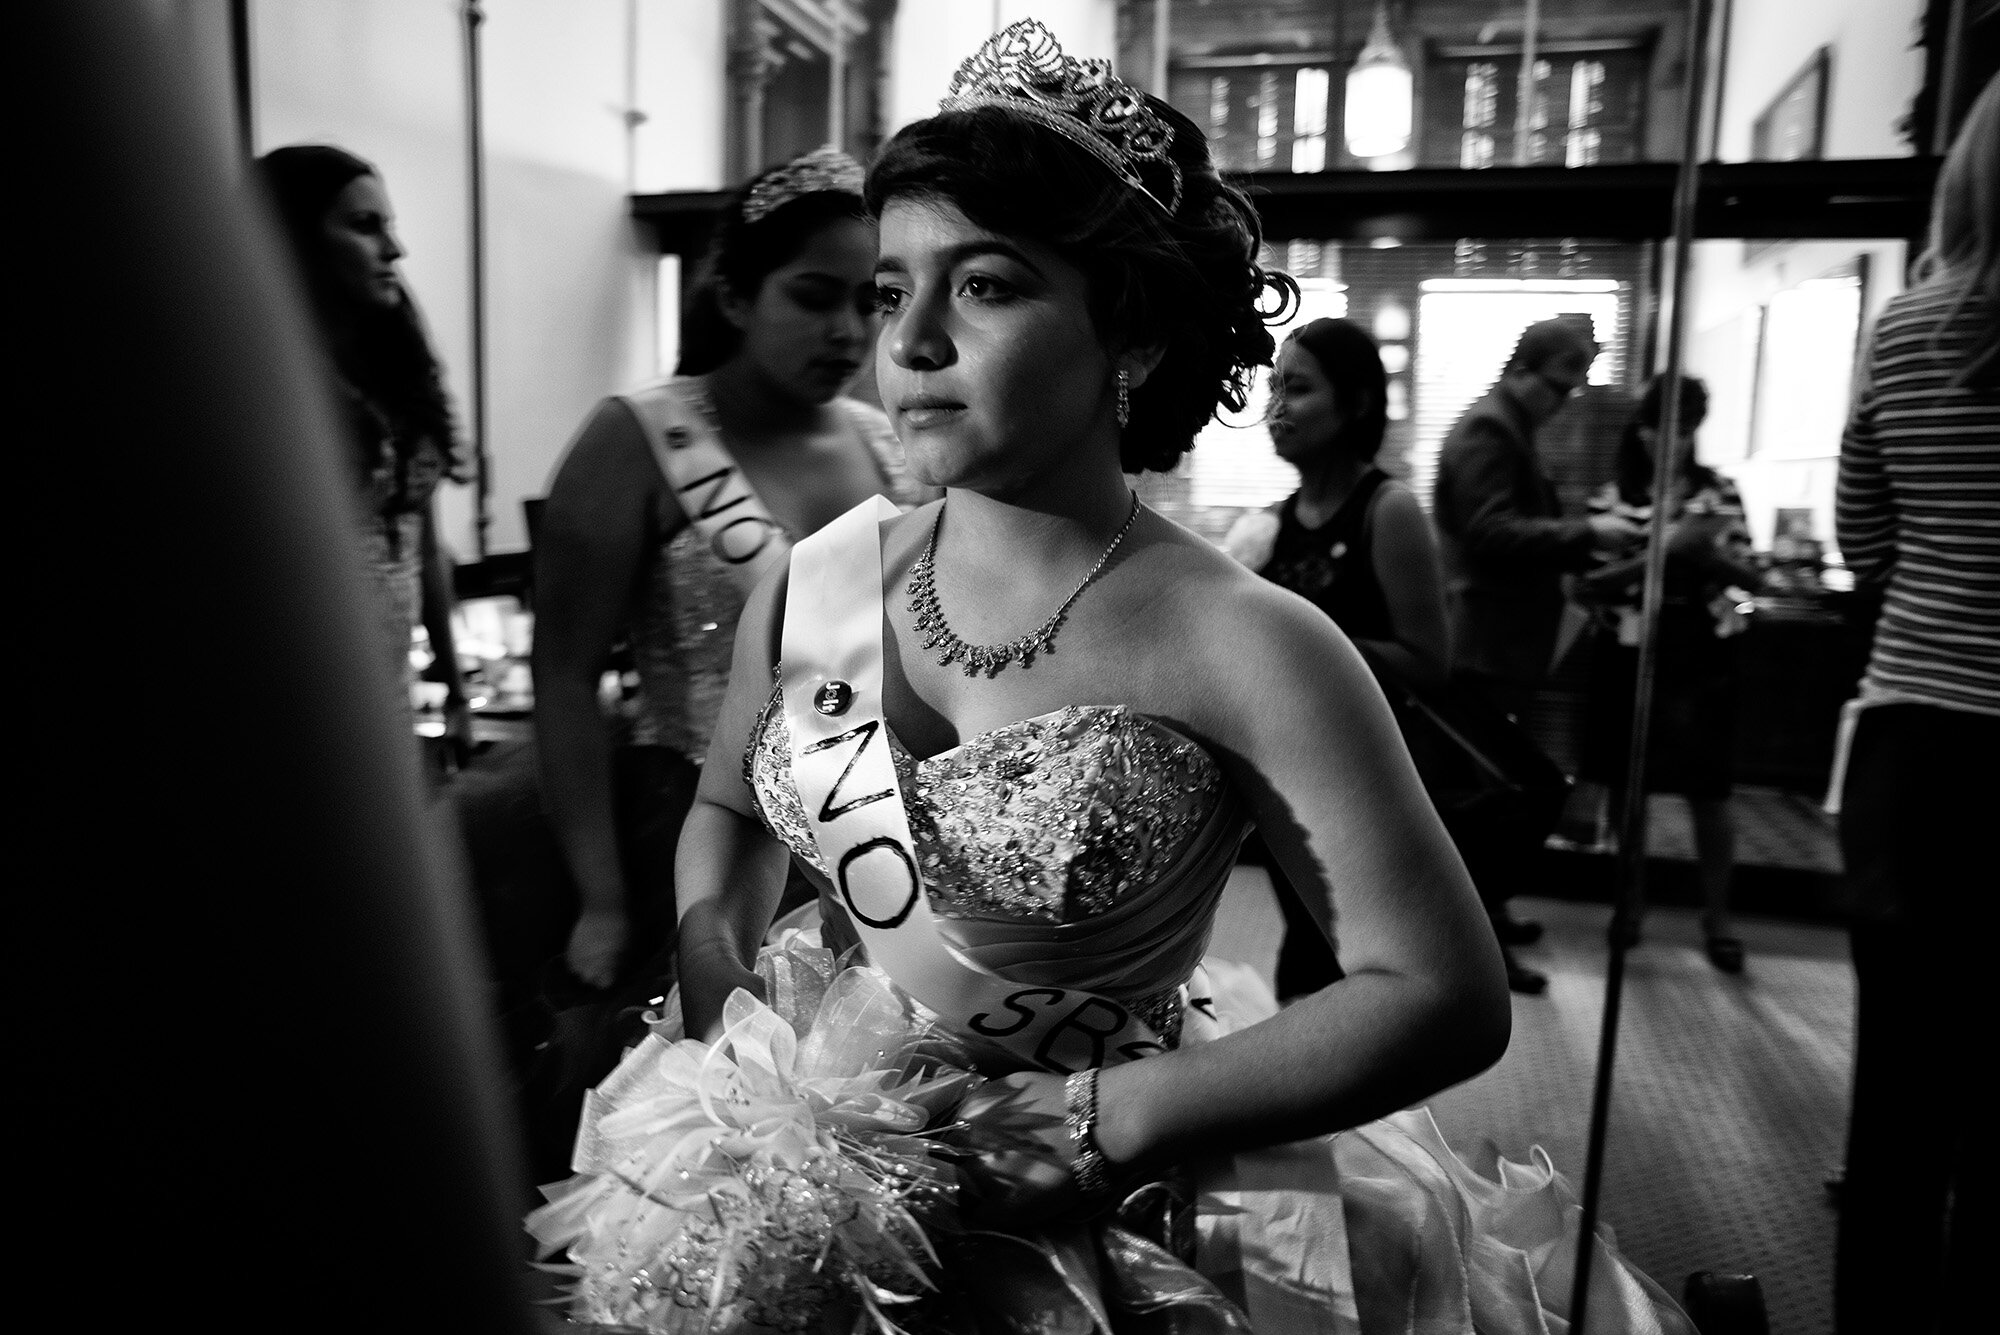  Jennifer Ramirez wears her quinceañera dress with a ‘NO SB4’ sash and stands outside the office of Texas Lt Governor Dan Patrick.  